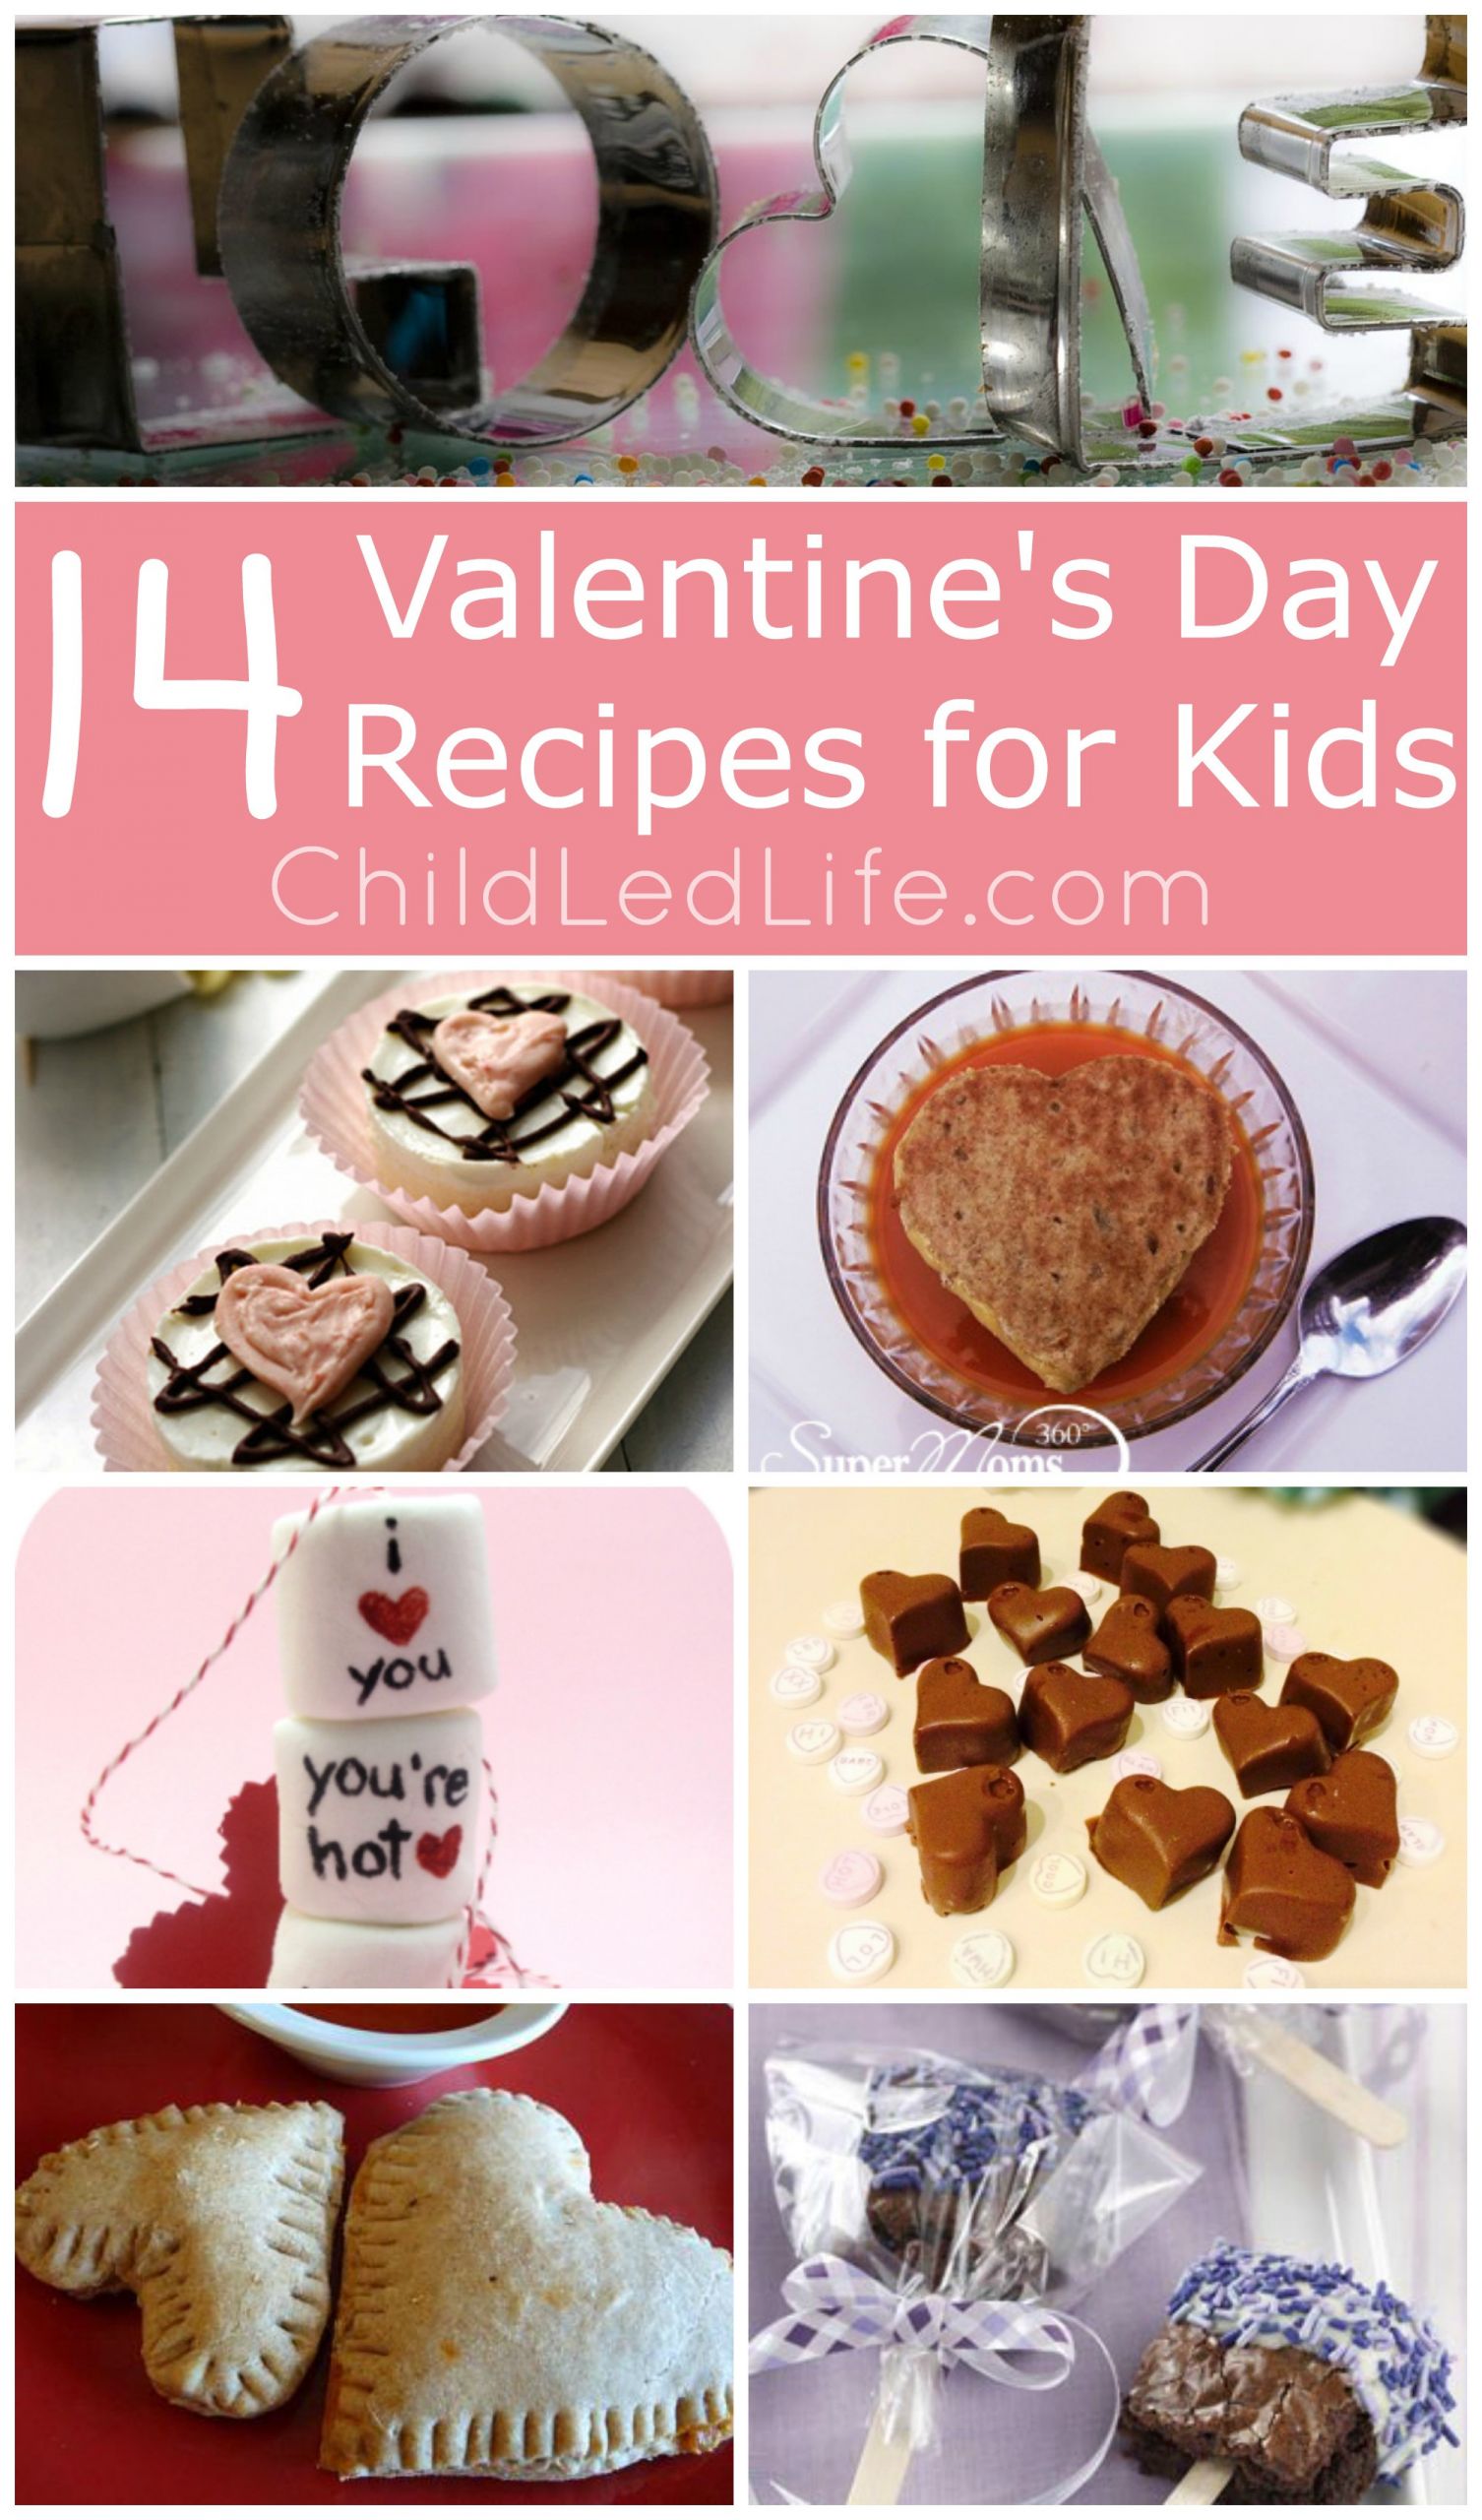 Valentines Day Recipes For Kids
 14 Valentines Day Recipes for Kids